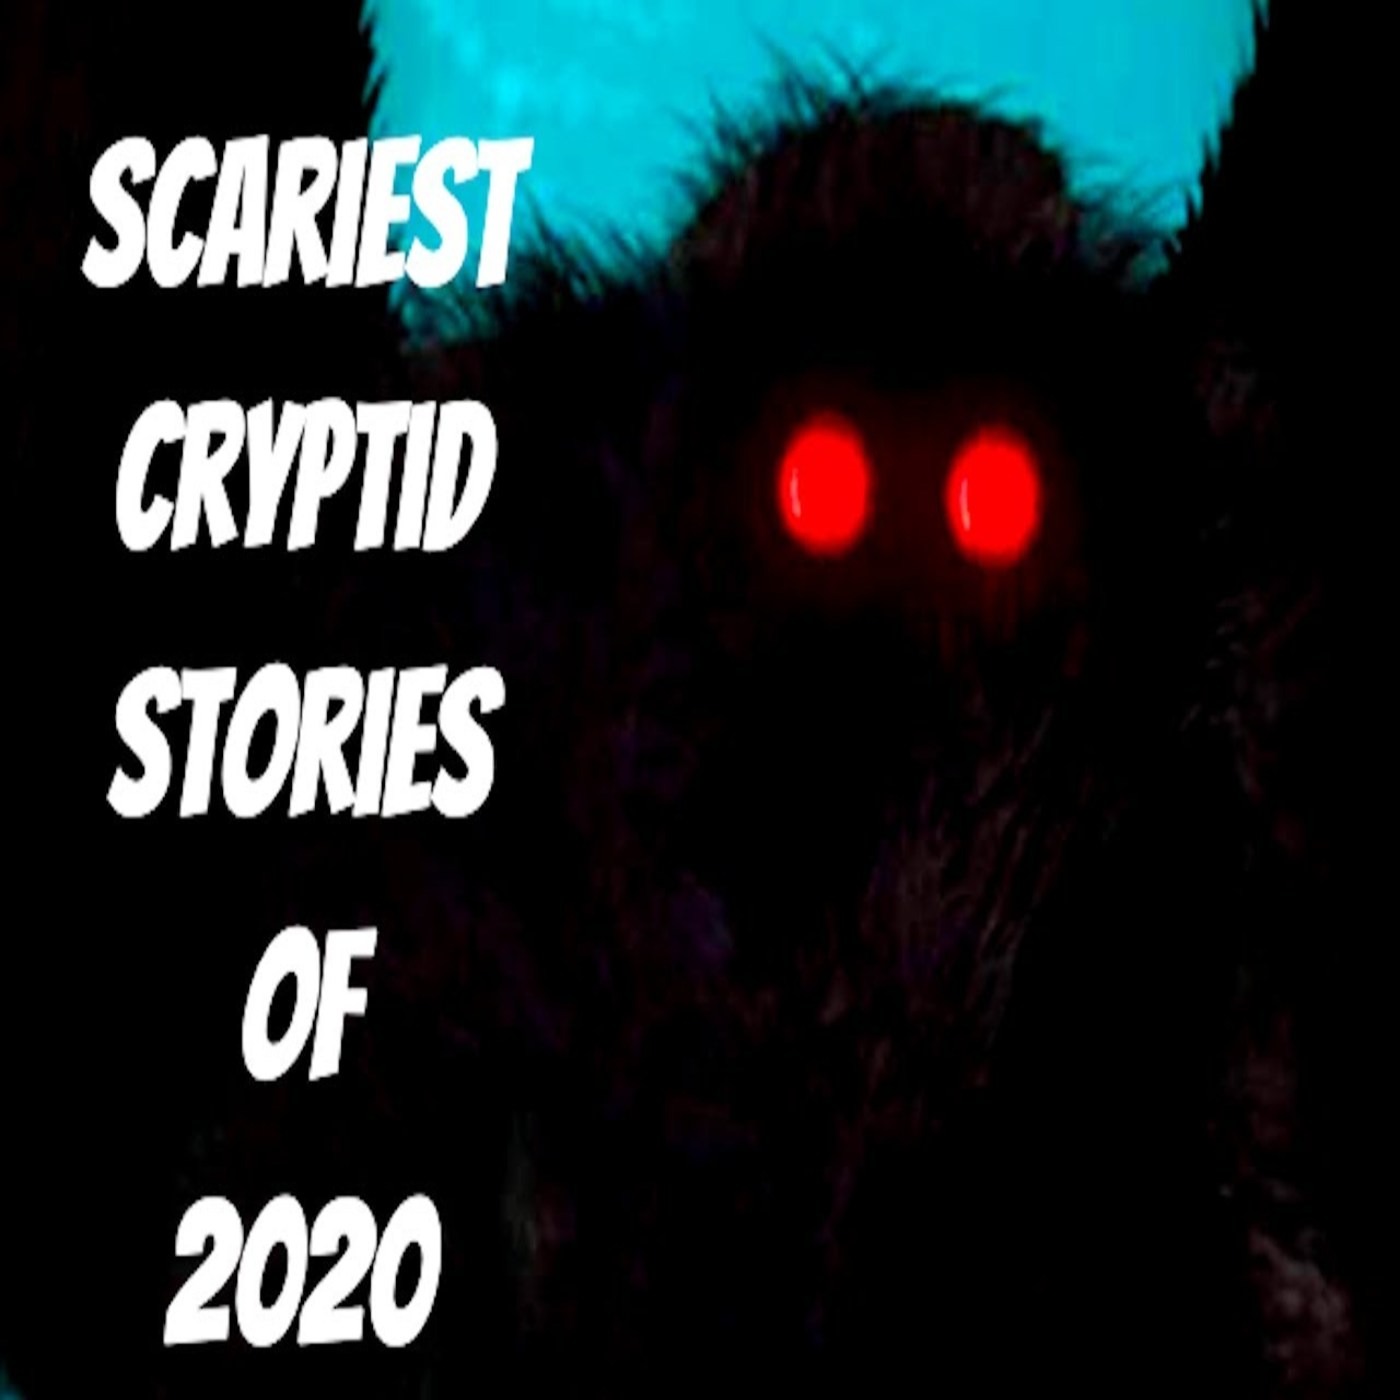 Scariest True Cryptid Stories of (2020)